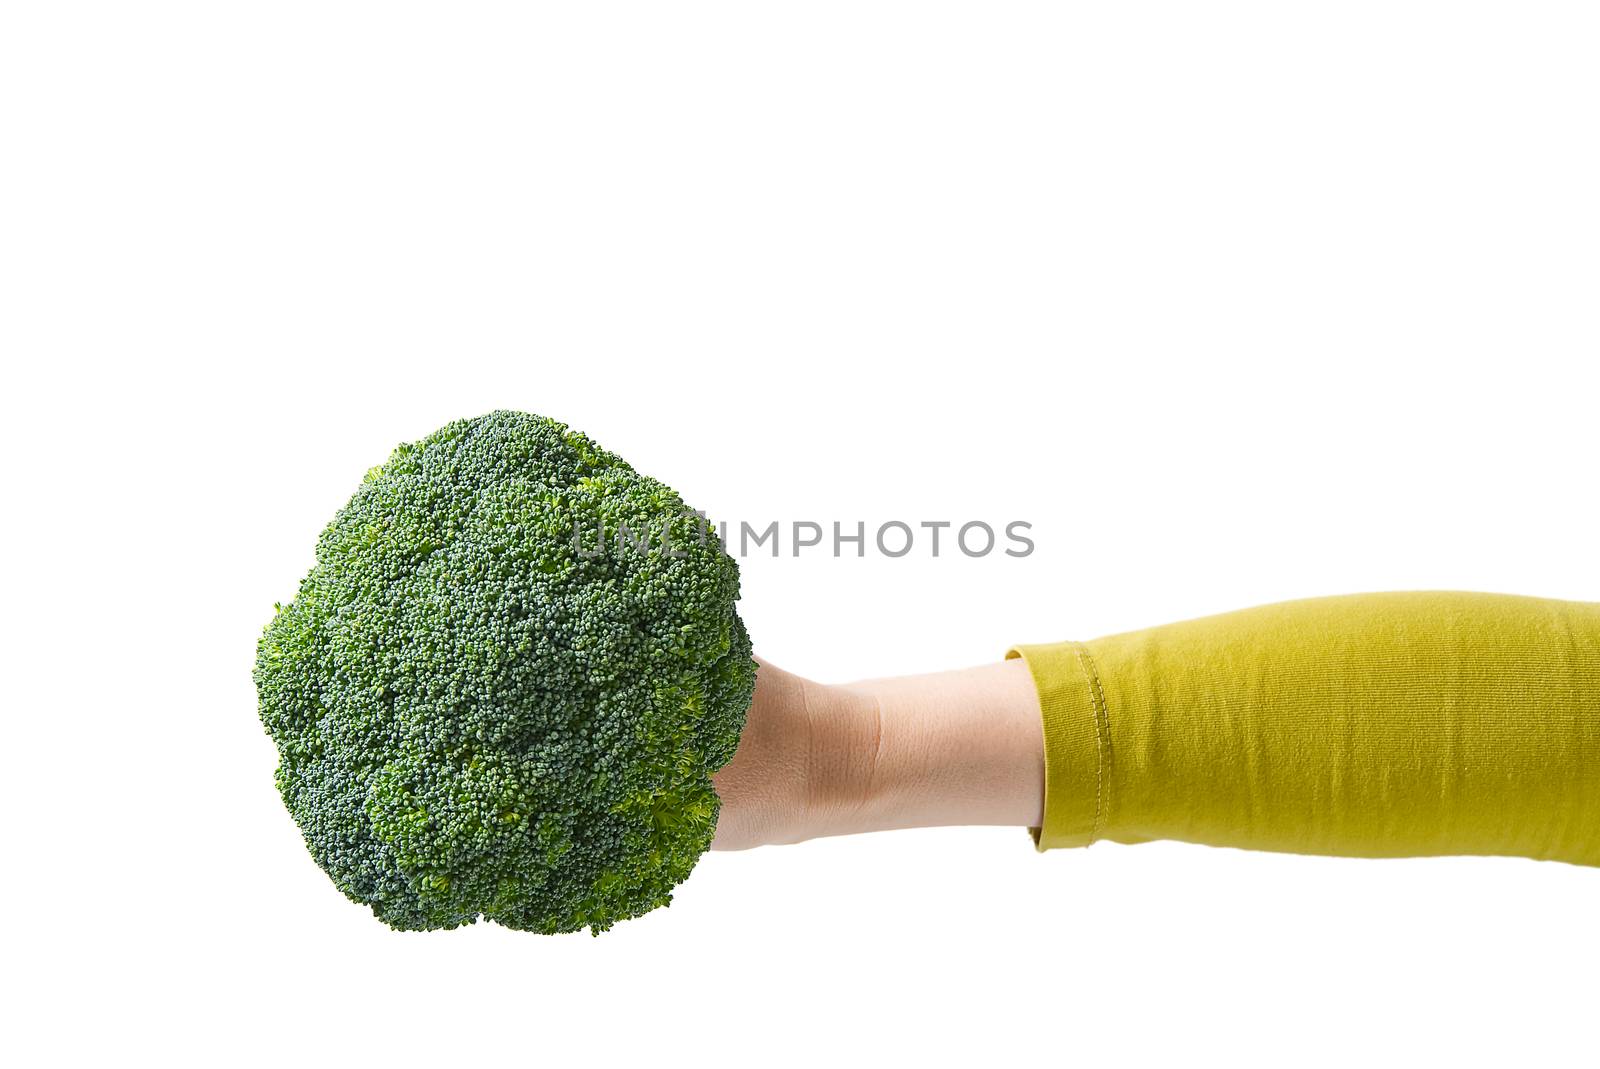 Fresh Organic Green Broccoli in Woman's Hand, Concept Healthy Food. Female Hand Holding Broccoli Isolated on White Background. by PhotoTime